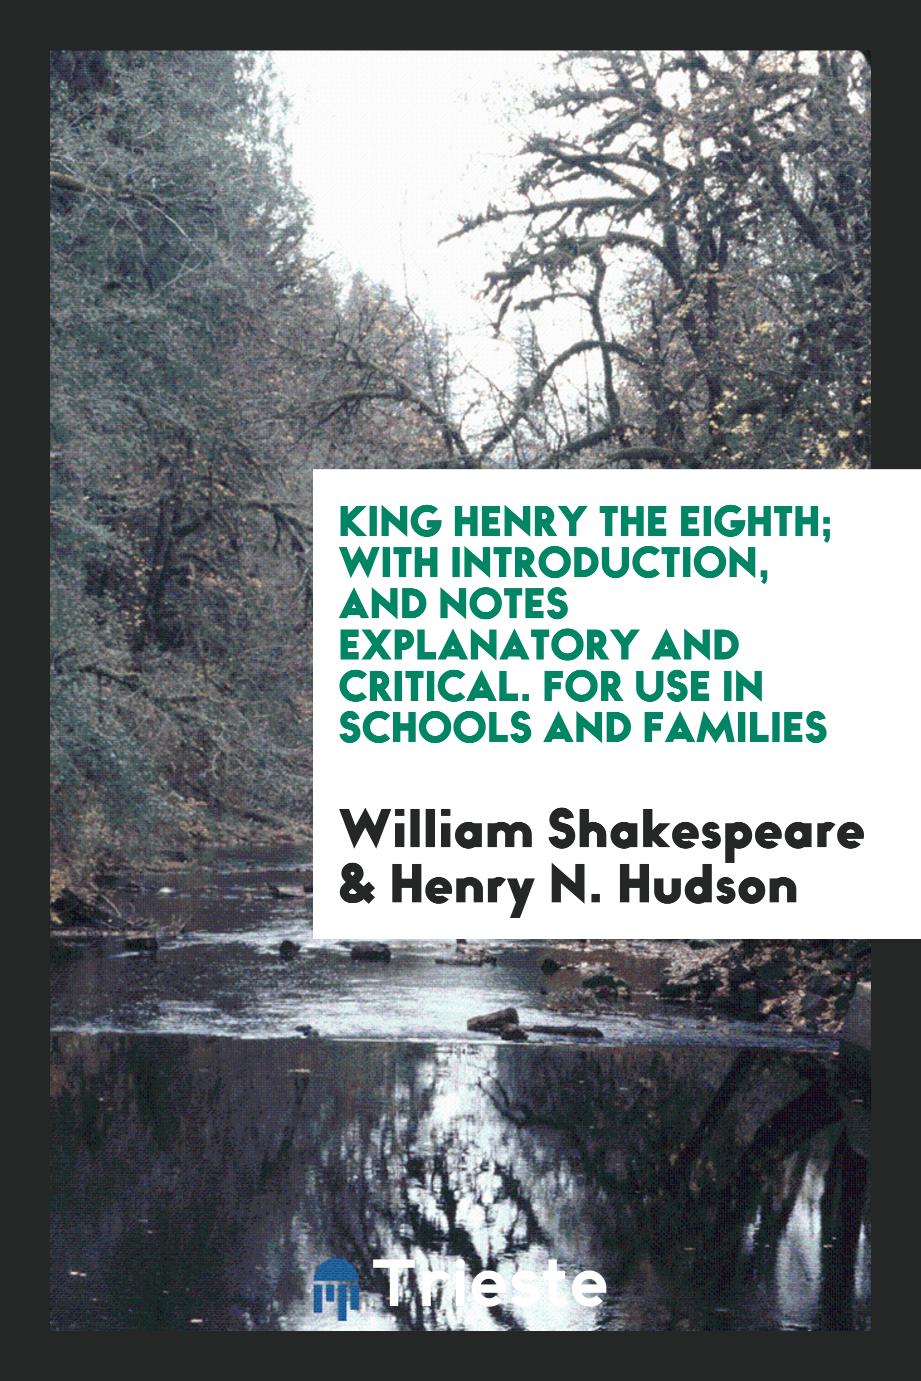 King Henry the Eighth; With Introduction, and Notes Explanatory and Critical. For Use in Schools and Families